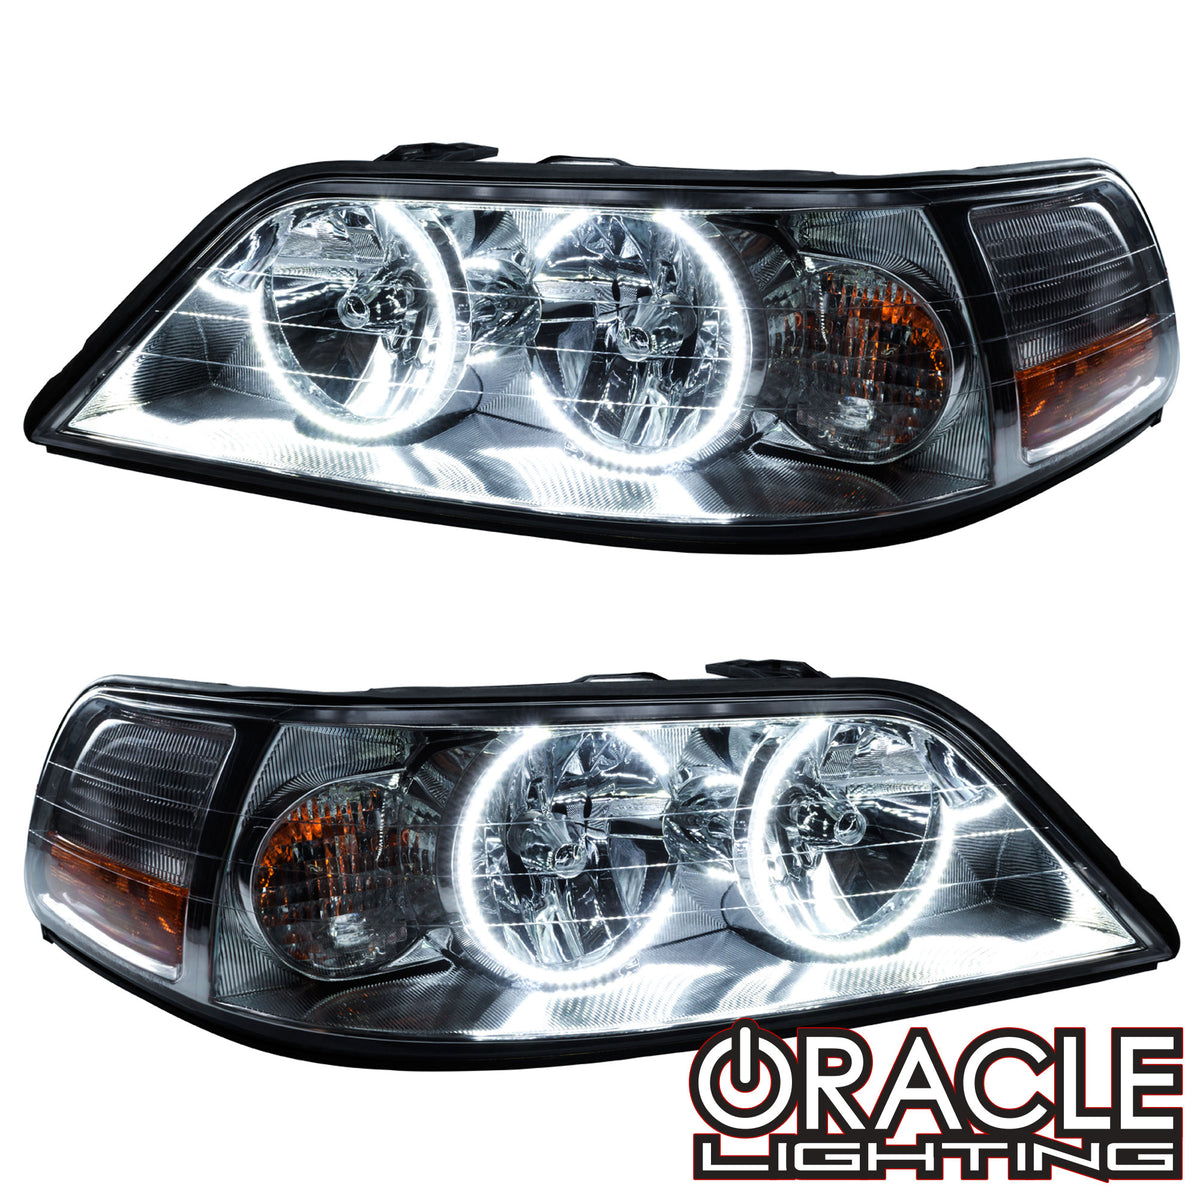 ORACLE Lighting 2005-2011 Lincoln Town Car Pre-Assembled